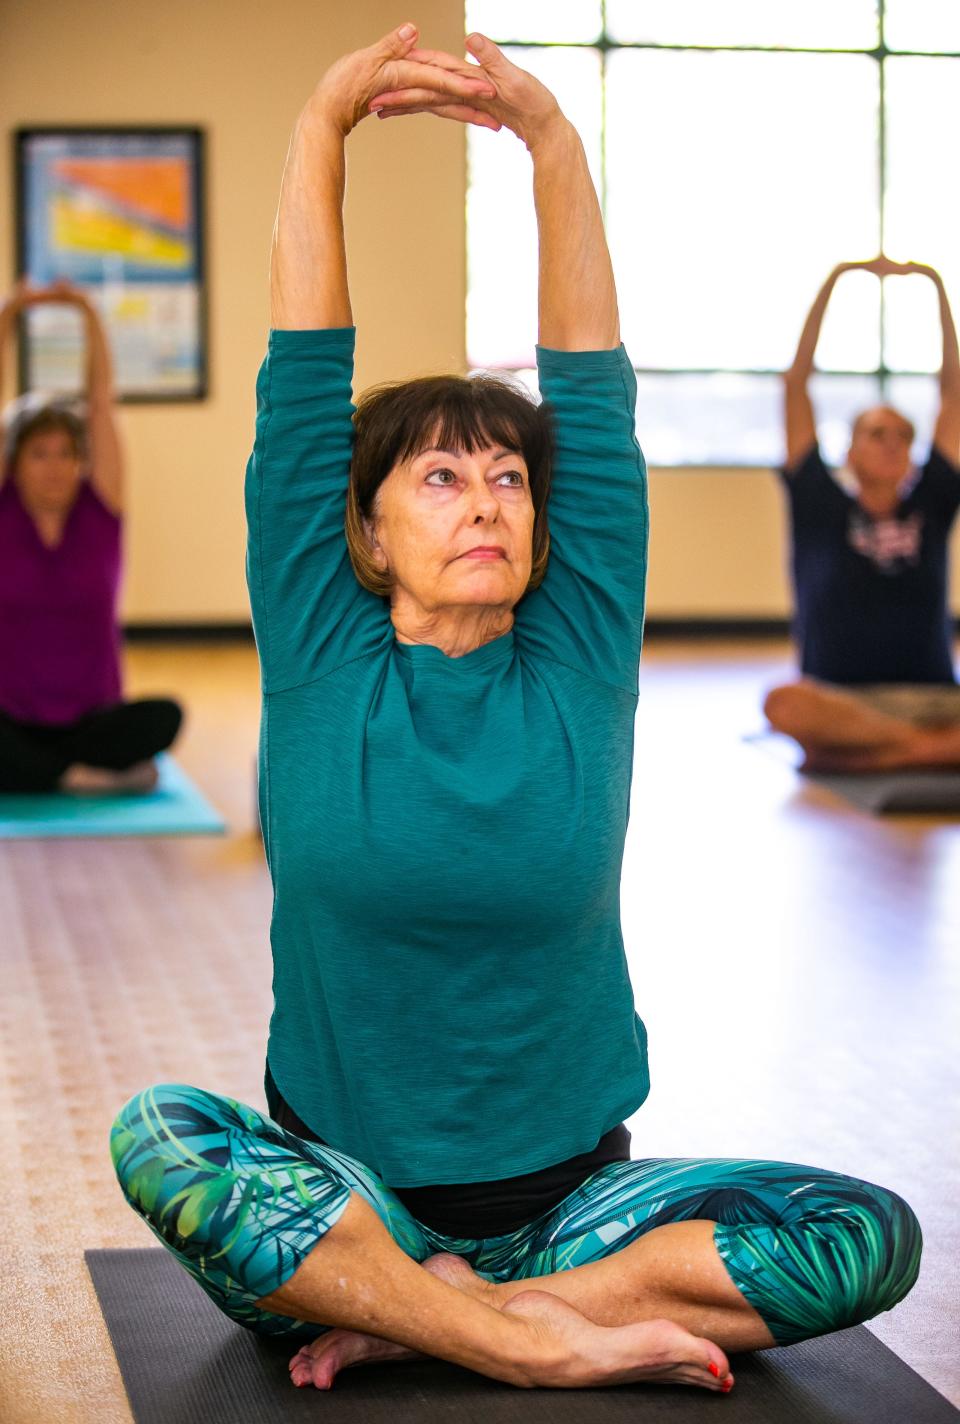 Linda Zimmerman, 71, of Summerfield, center, works out in Yoga class Wednesday afternoon, with her friends at Del Webb Spruce Creek in Summerfield. Zimmerman has chronic kidney disease and is in need of a transplant. Her current kidney function is around 11%.